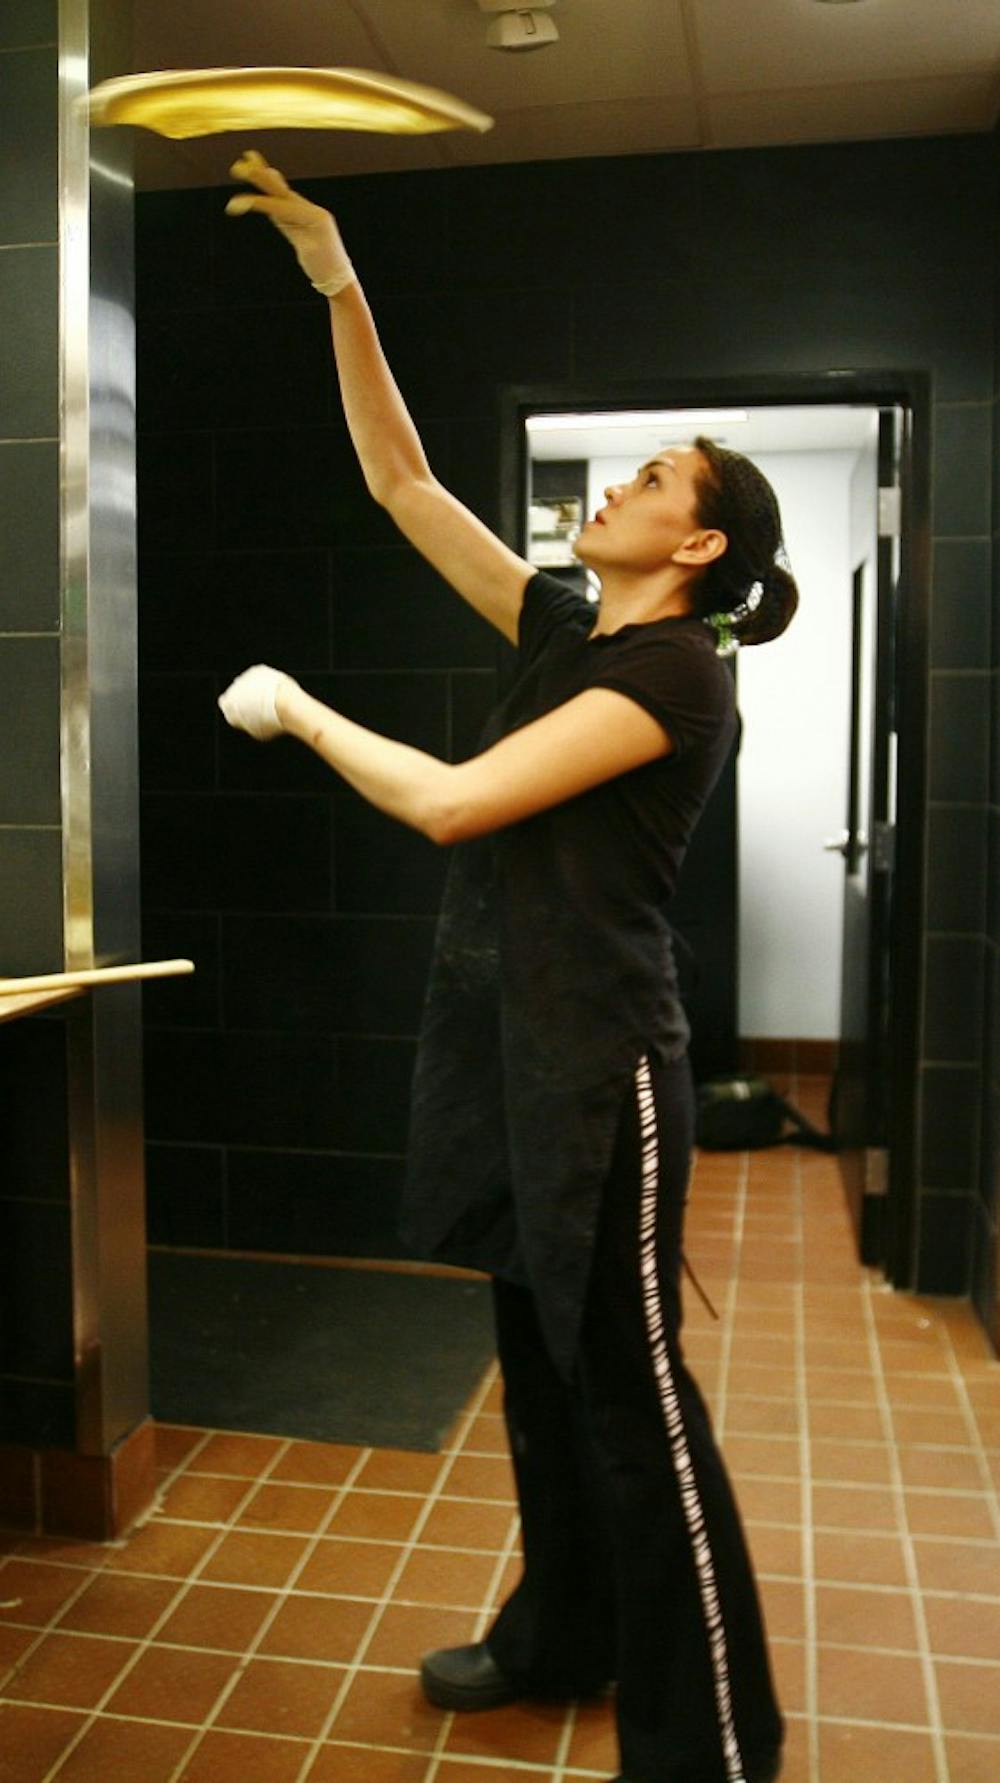 Yalu Rivas tosses pizza dough at Friday's training night. "I think it's one of the best pizzas," she said. 